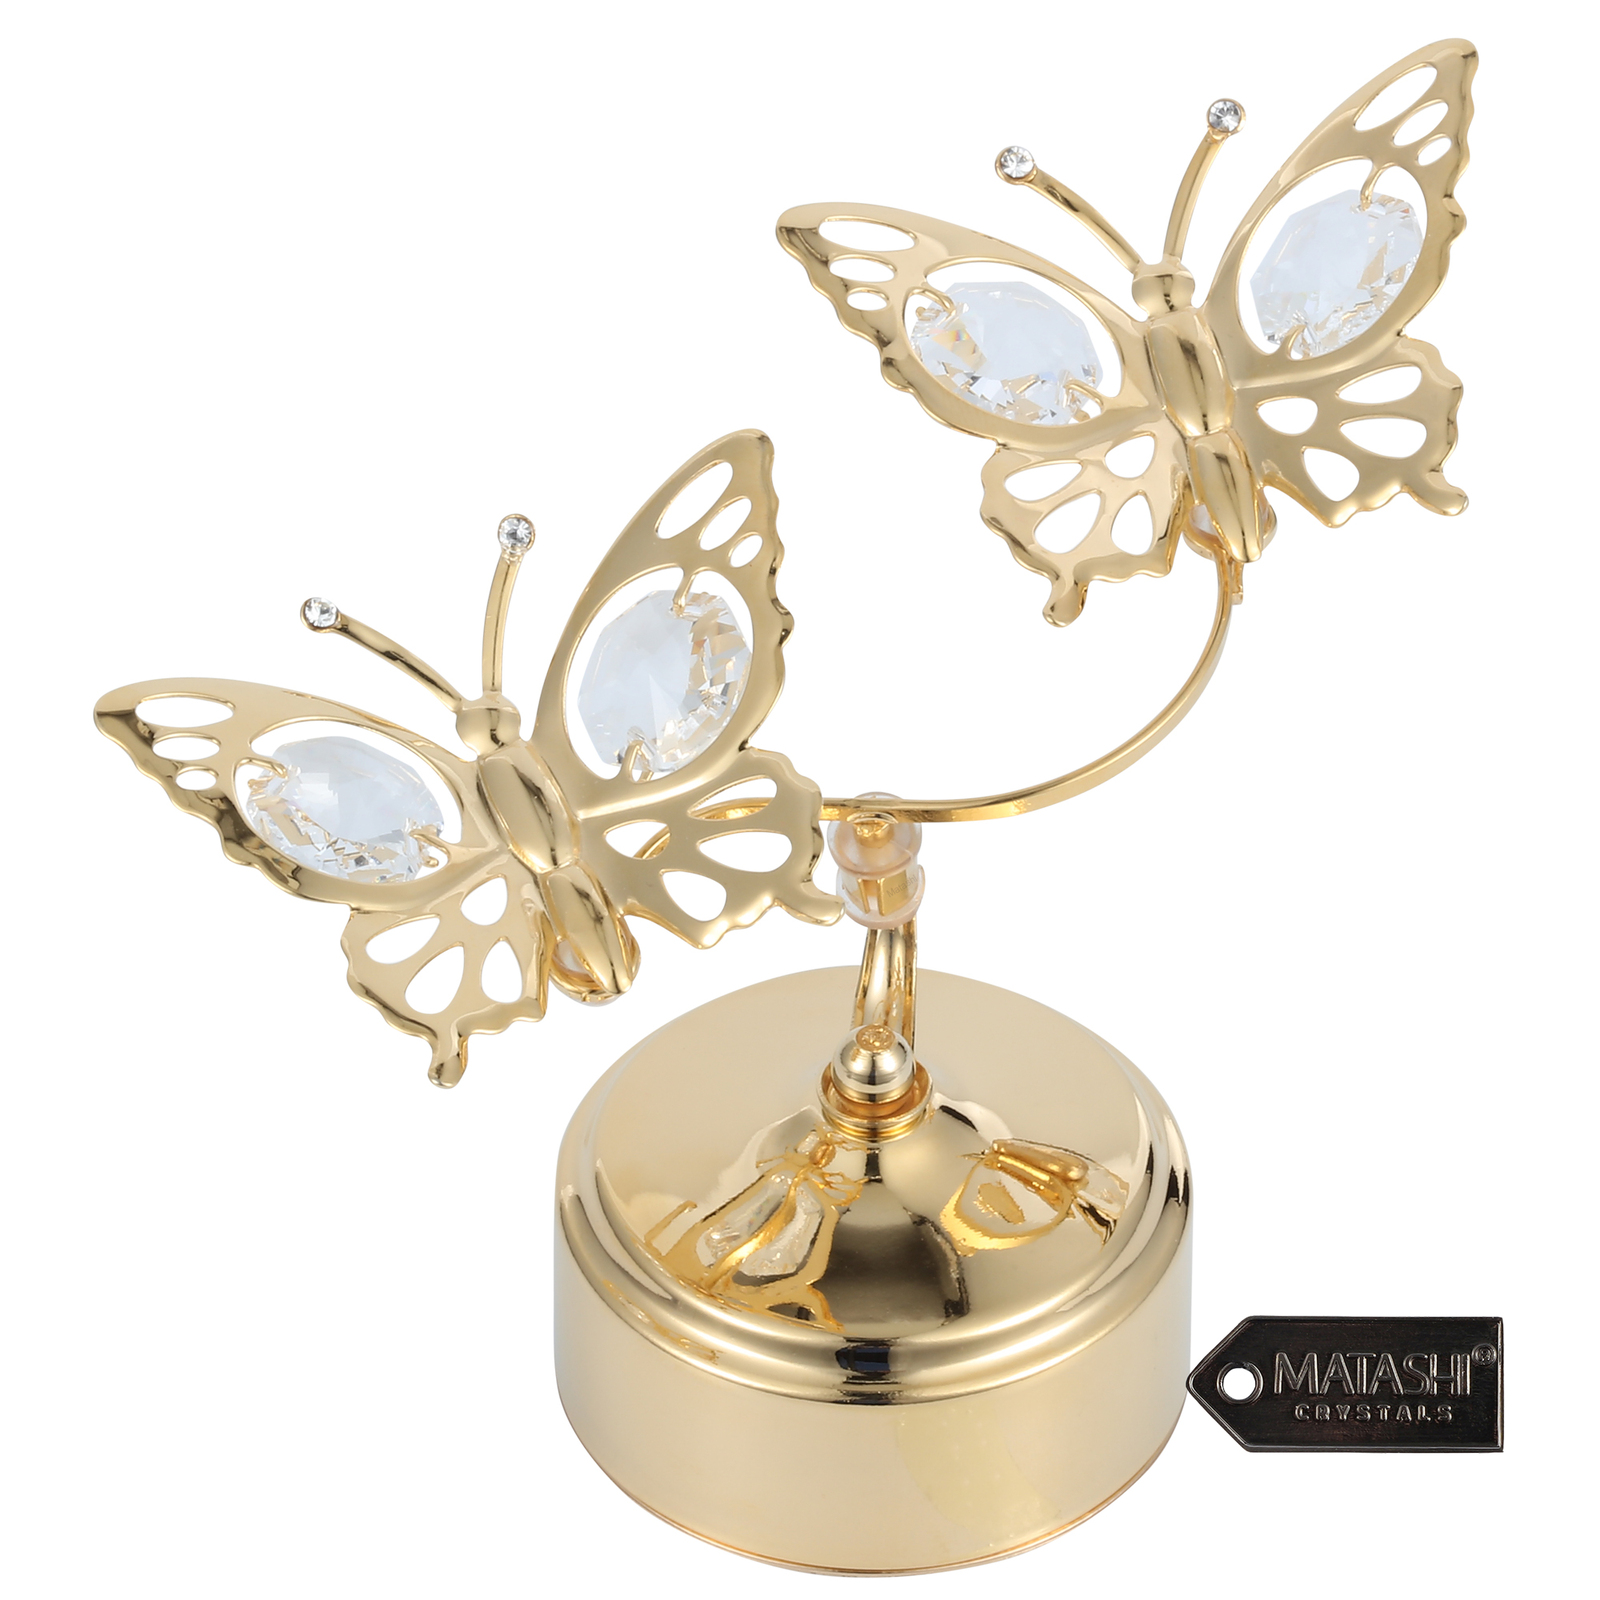 Primary image for Matashi 24K Gold Plated Music Box & Crystal Double Butterfly Figurine Ornament